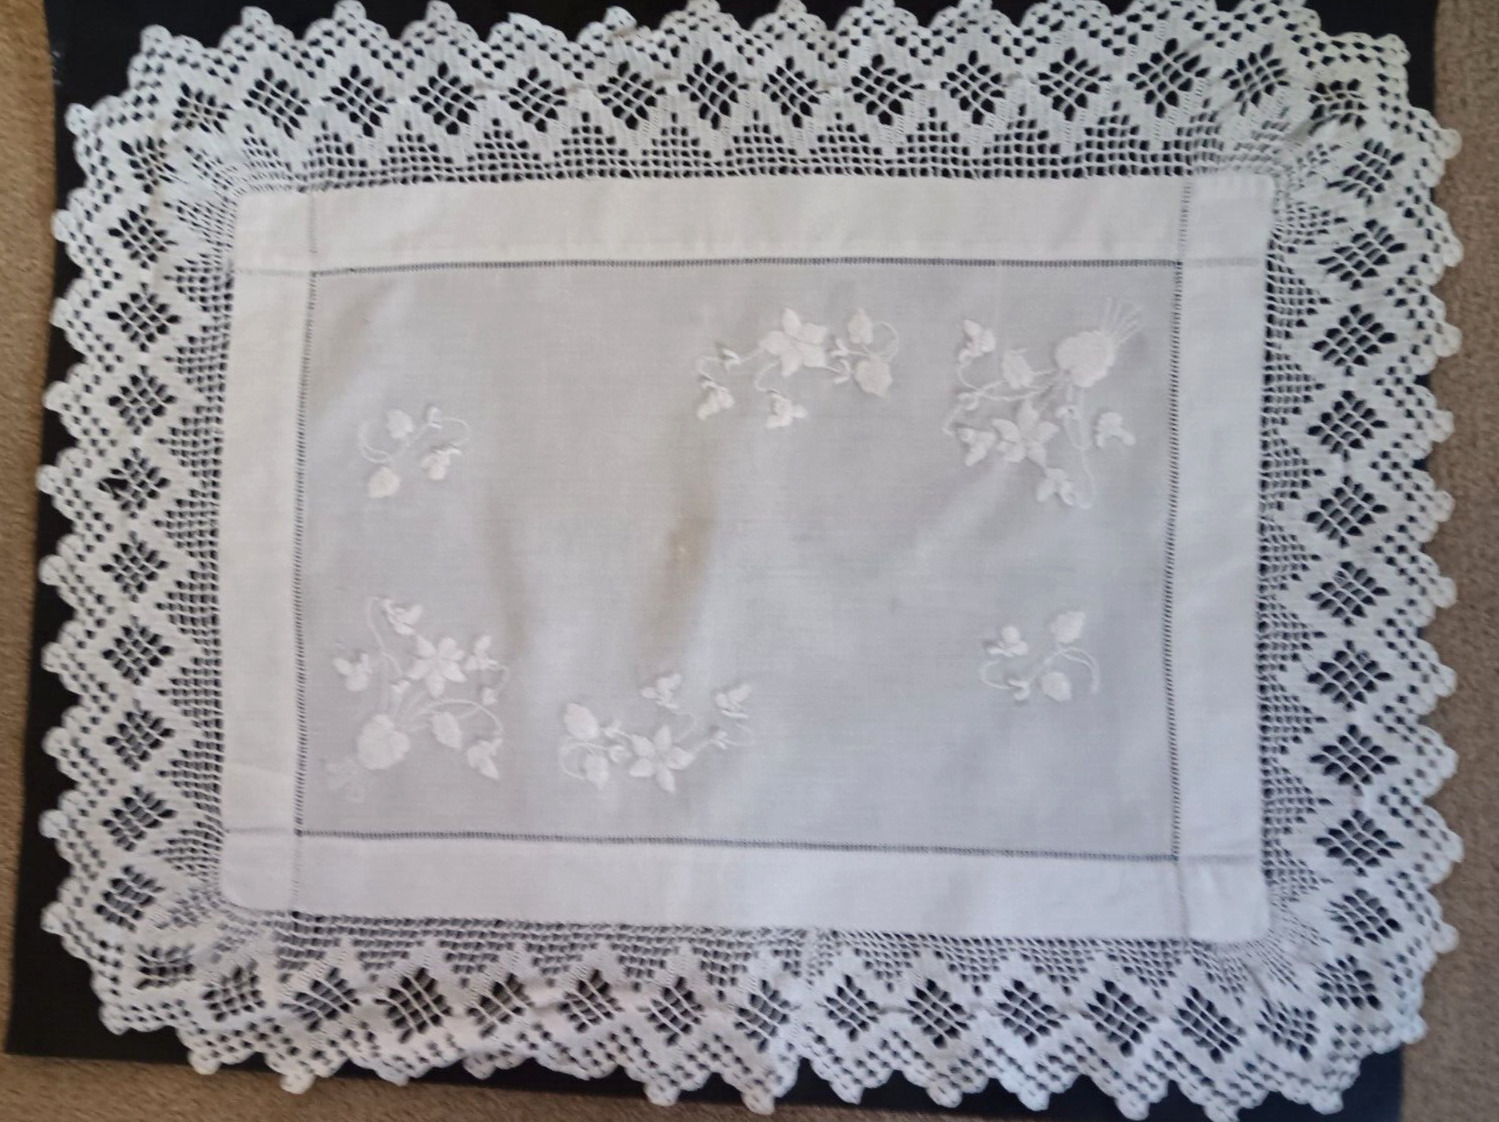 Vintage white rectangular cloth with crochet edges and white embroidery.